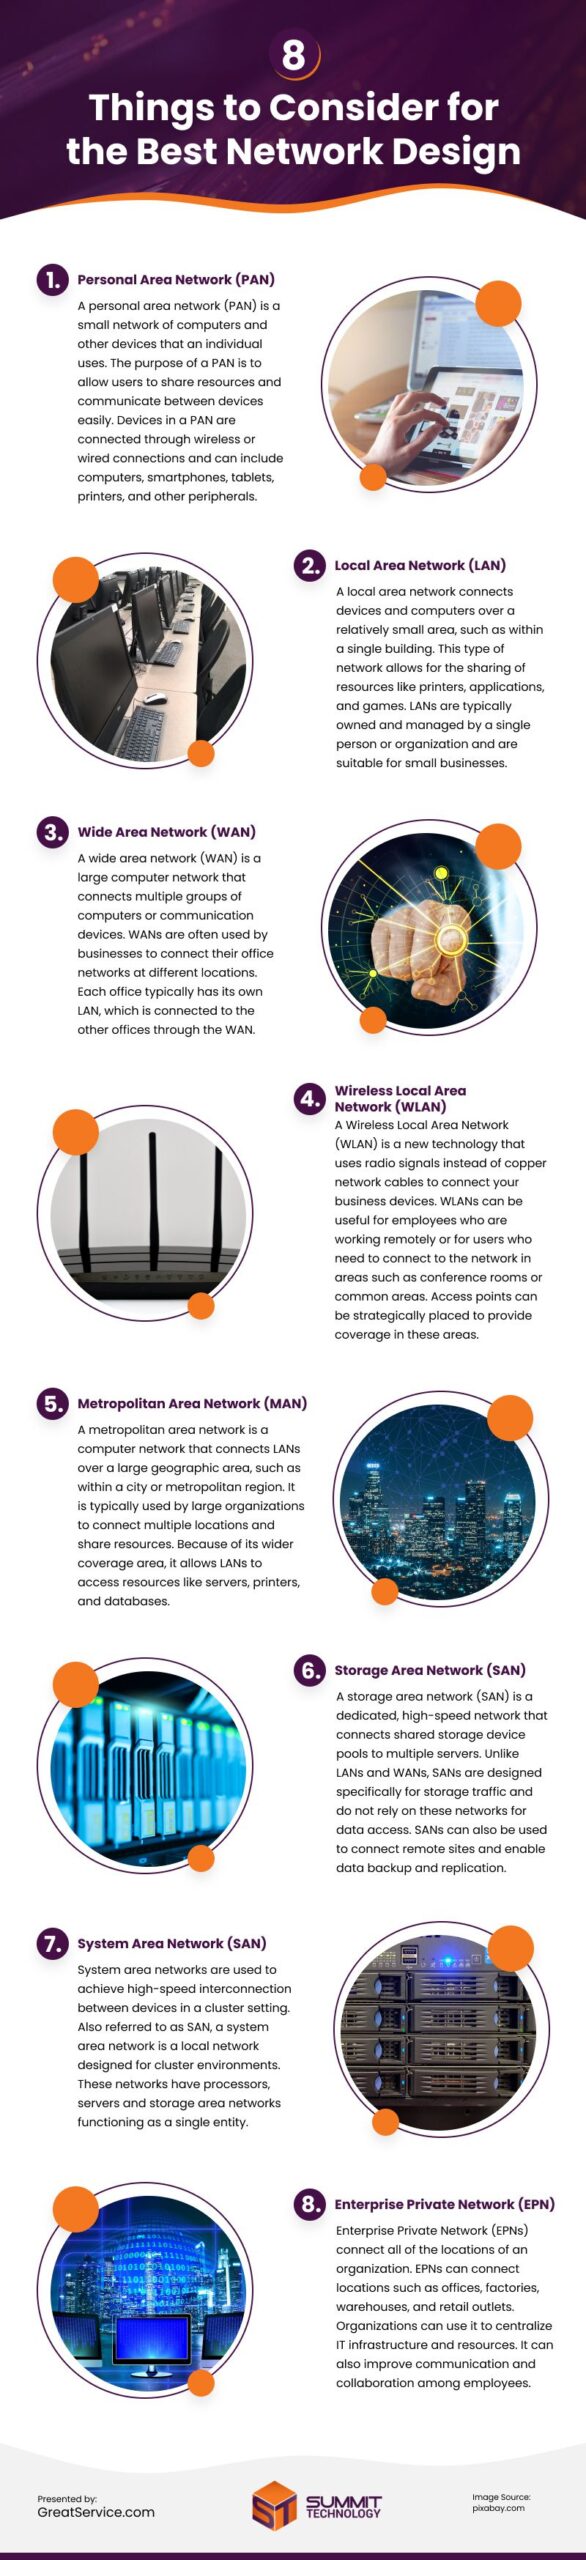 8 Things to Consider for the Best Network Design Infographic